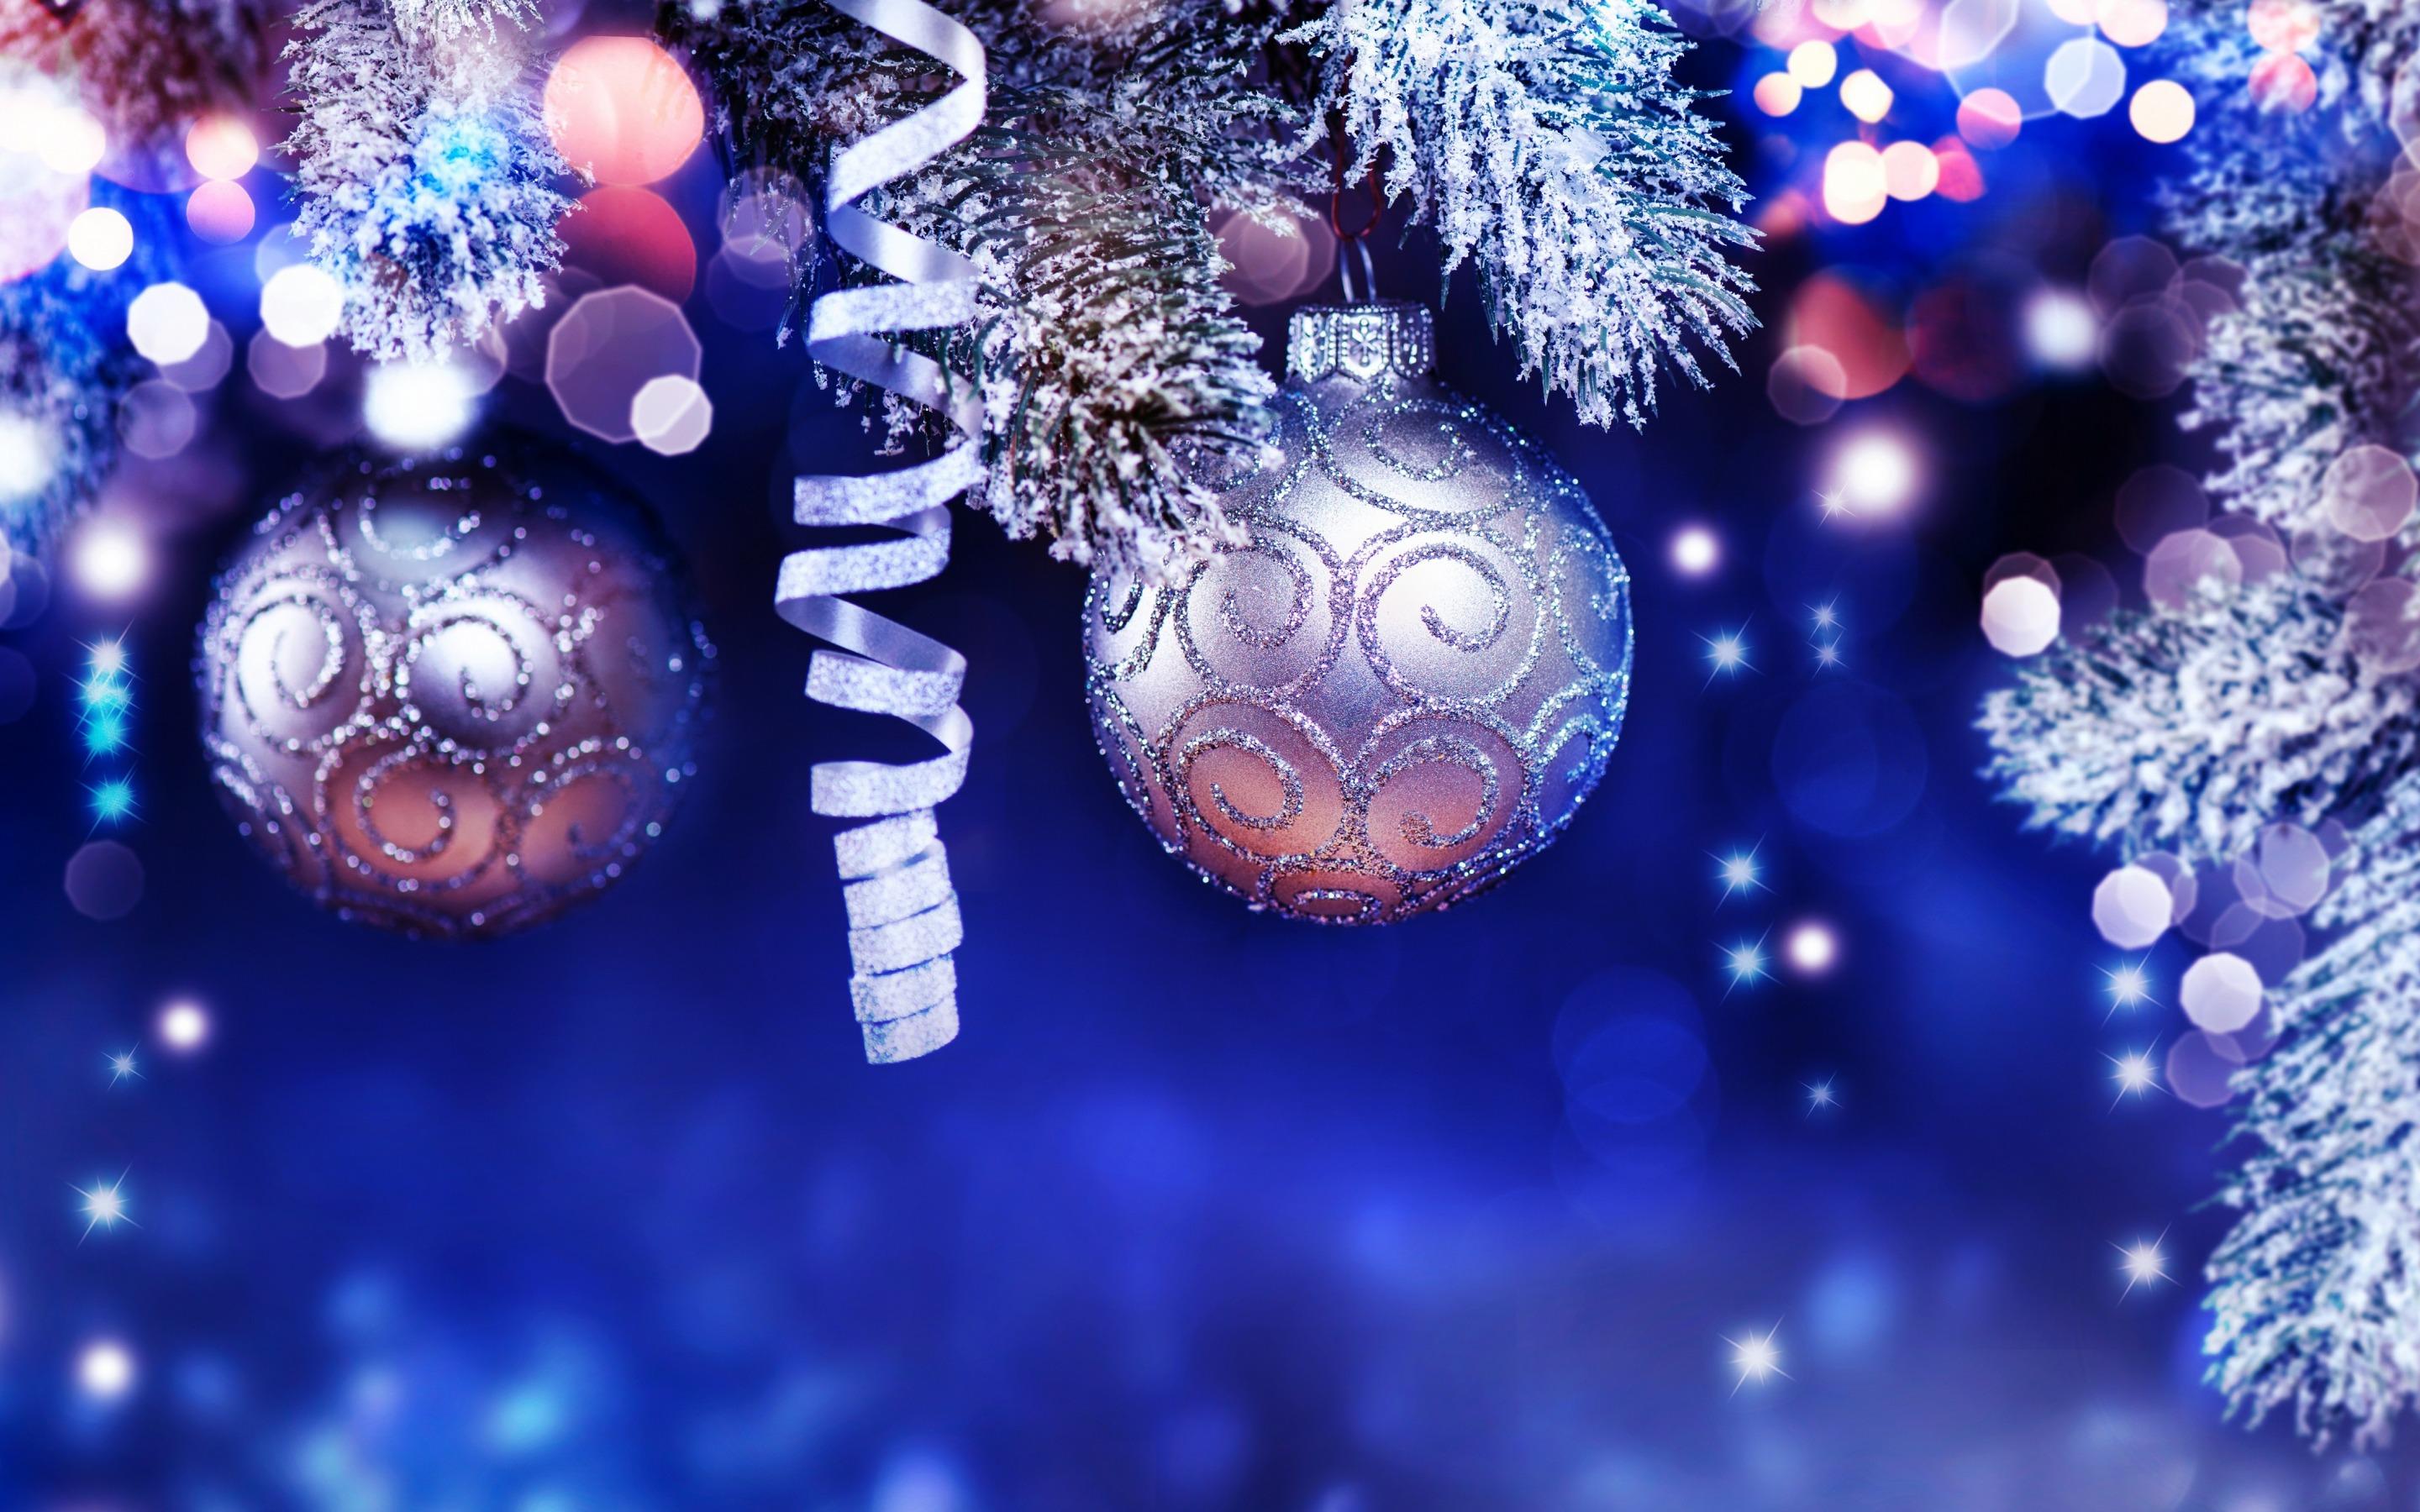 Blue and Silver Christmas Wallpapers - Top Free Blue and Silver ...